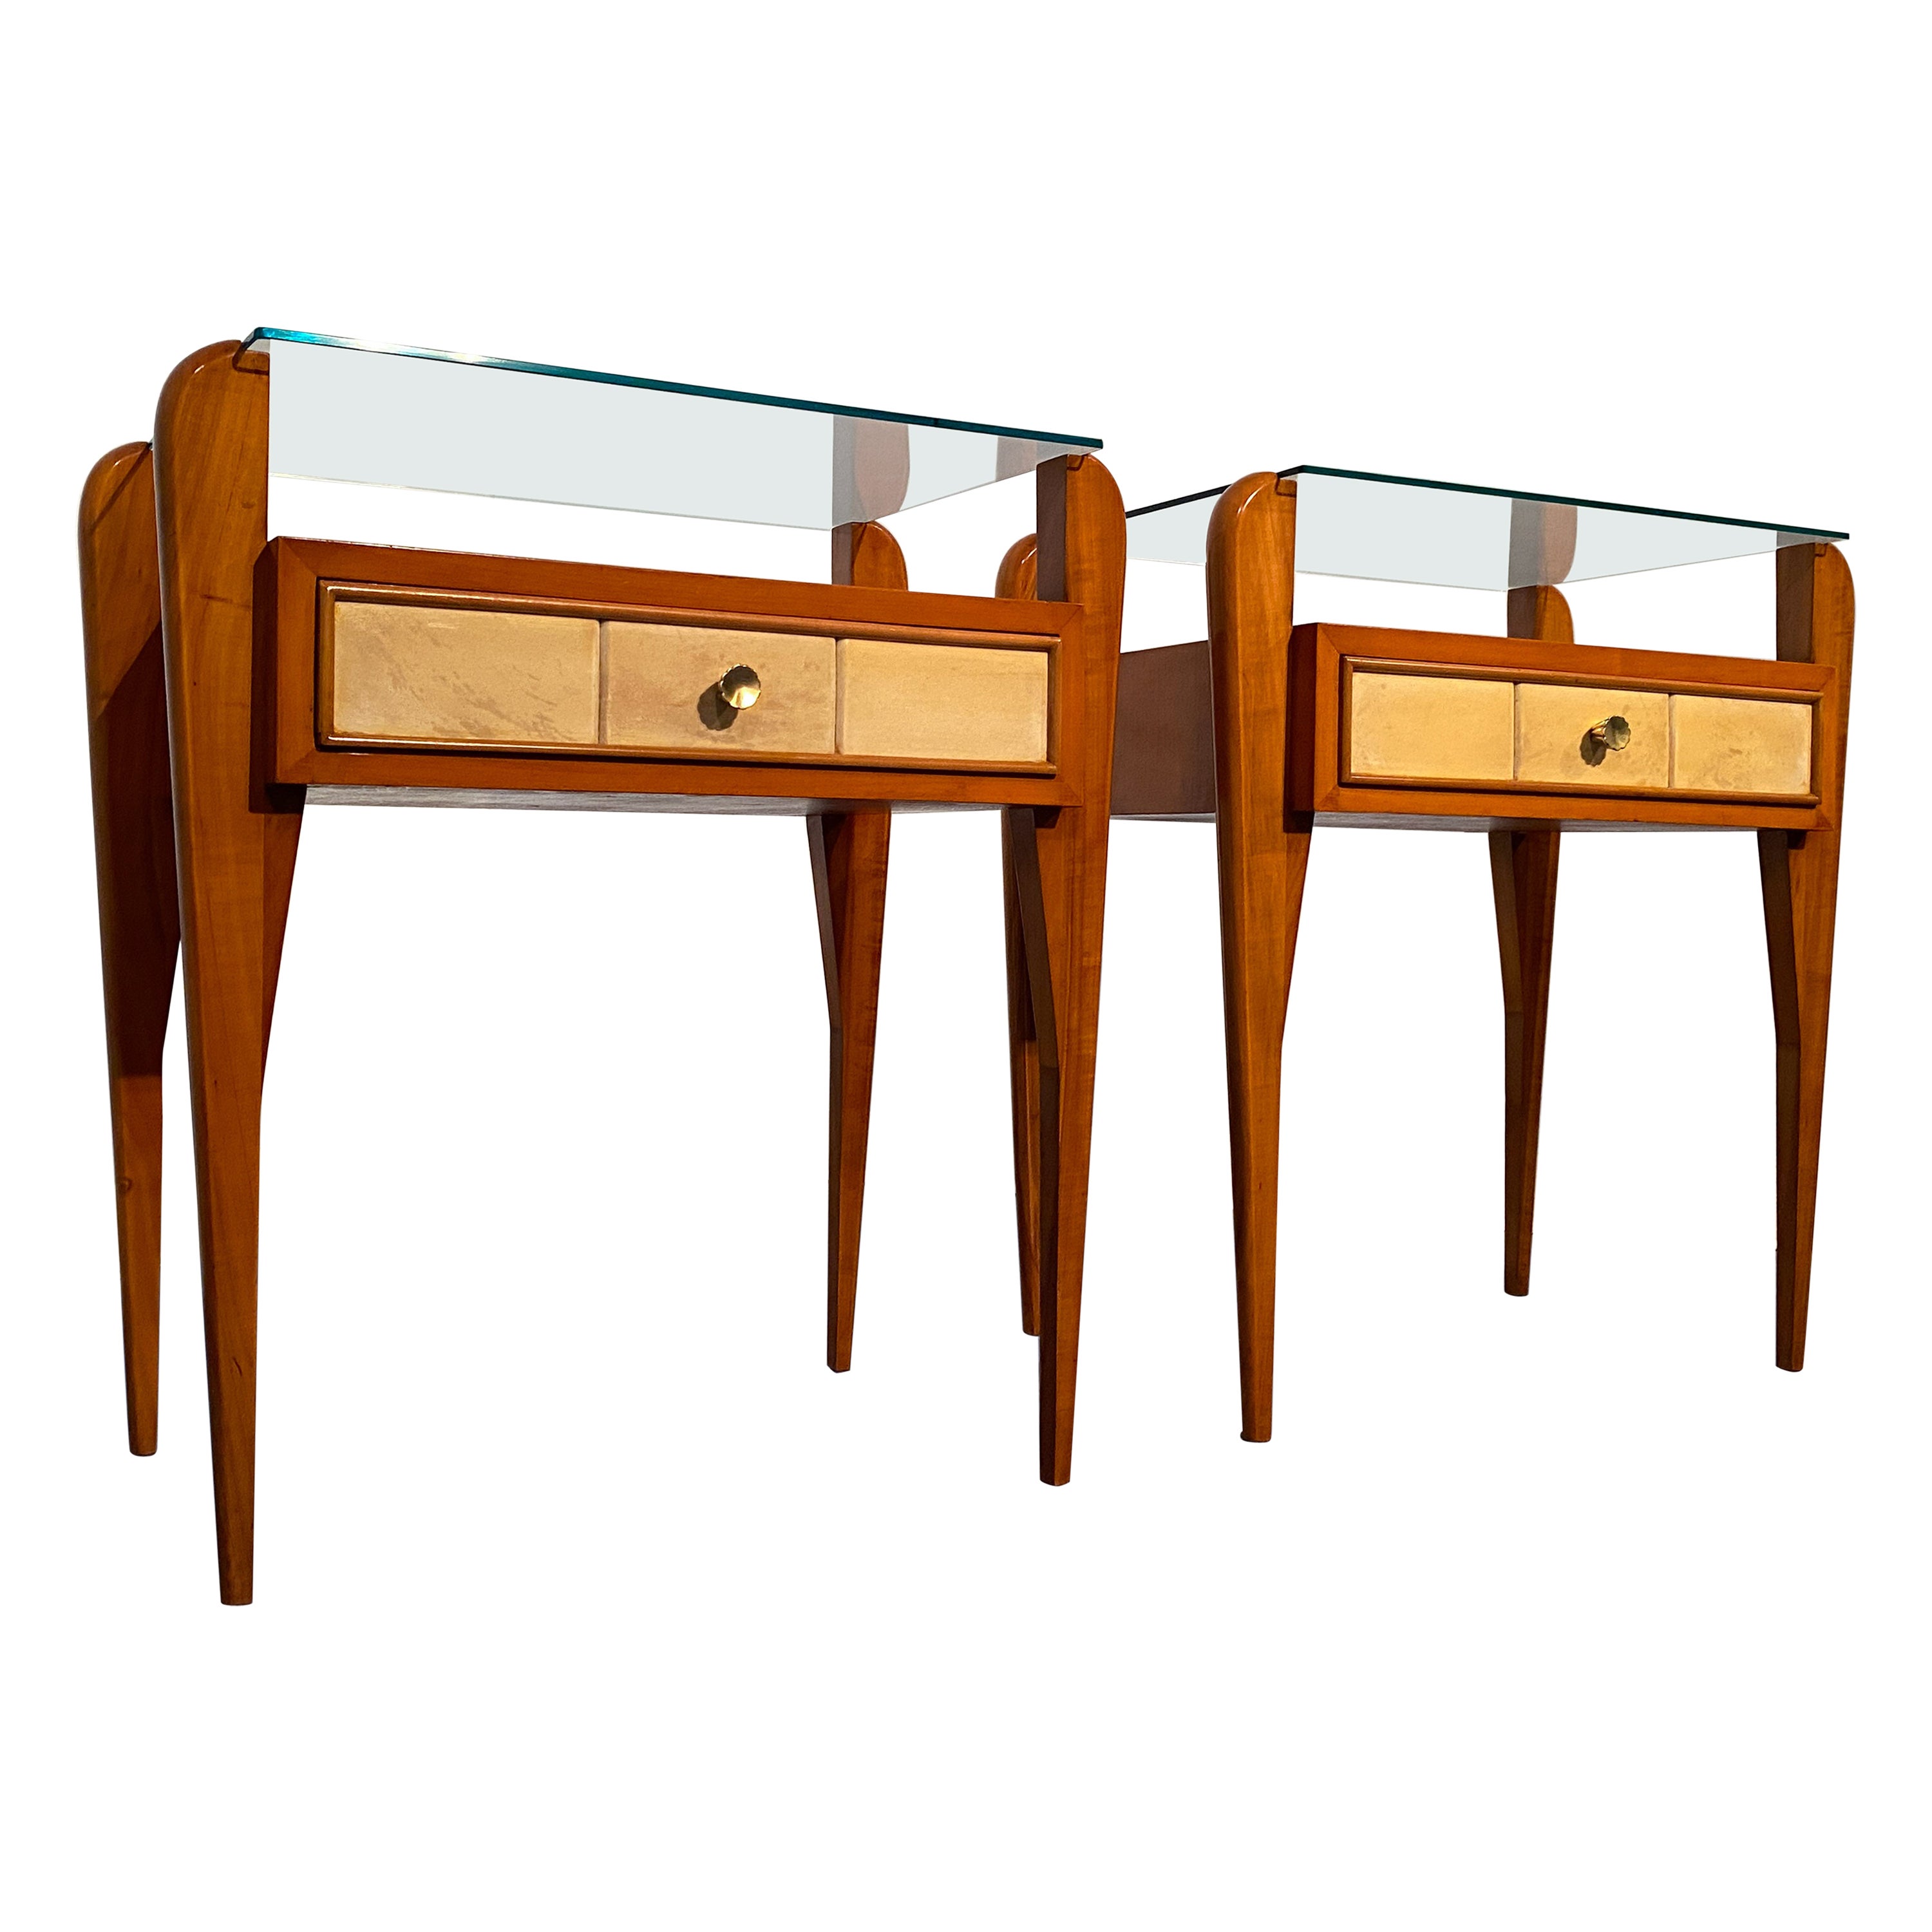 Italian Mid-Century Parchment Bedside or Nightstands by Osvaldo Borsani, 1950 For Sale